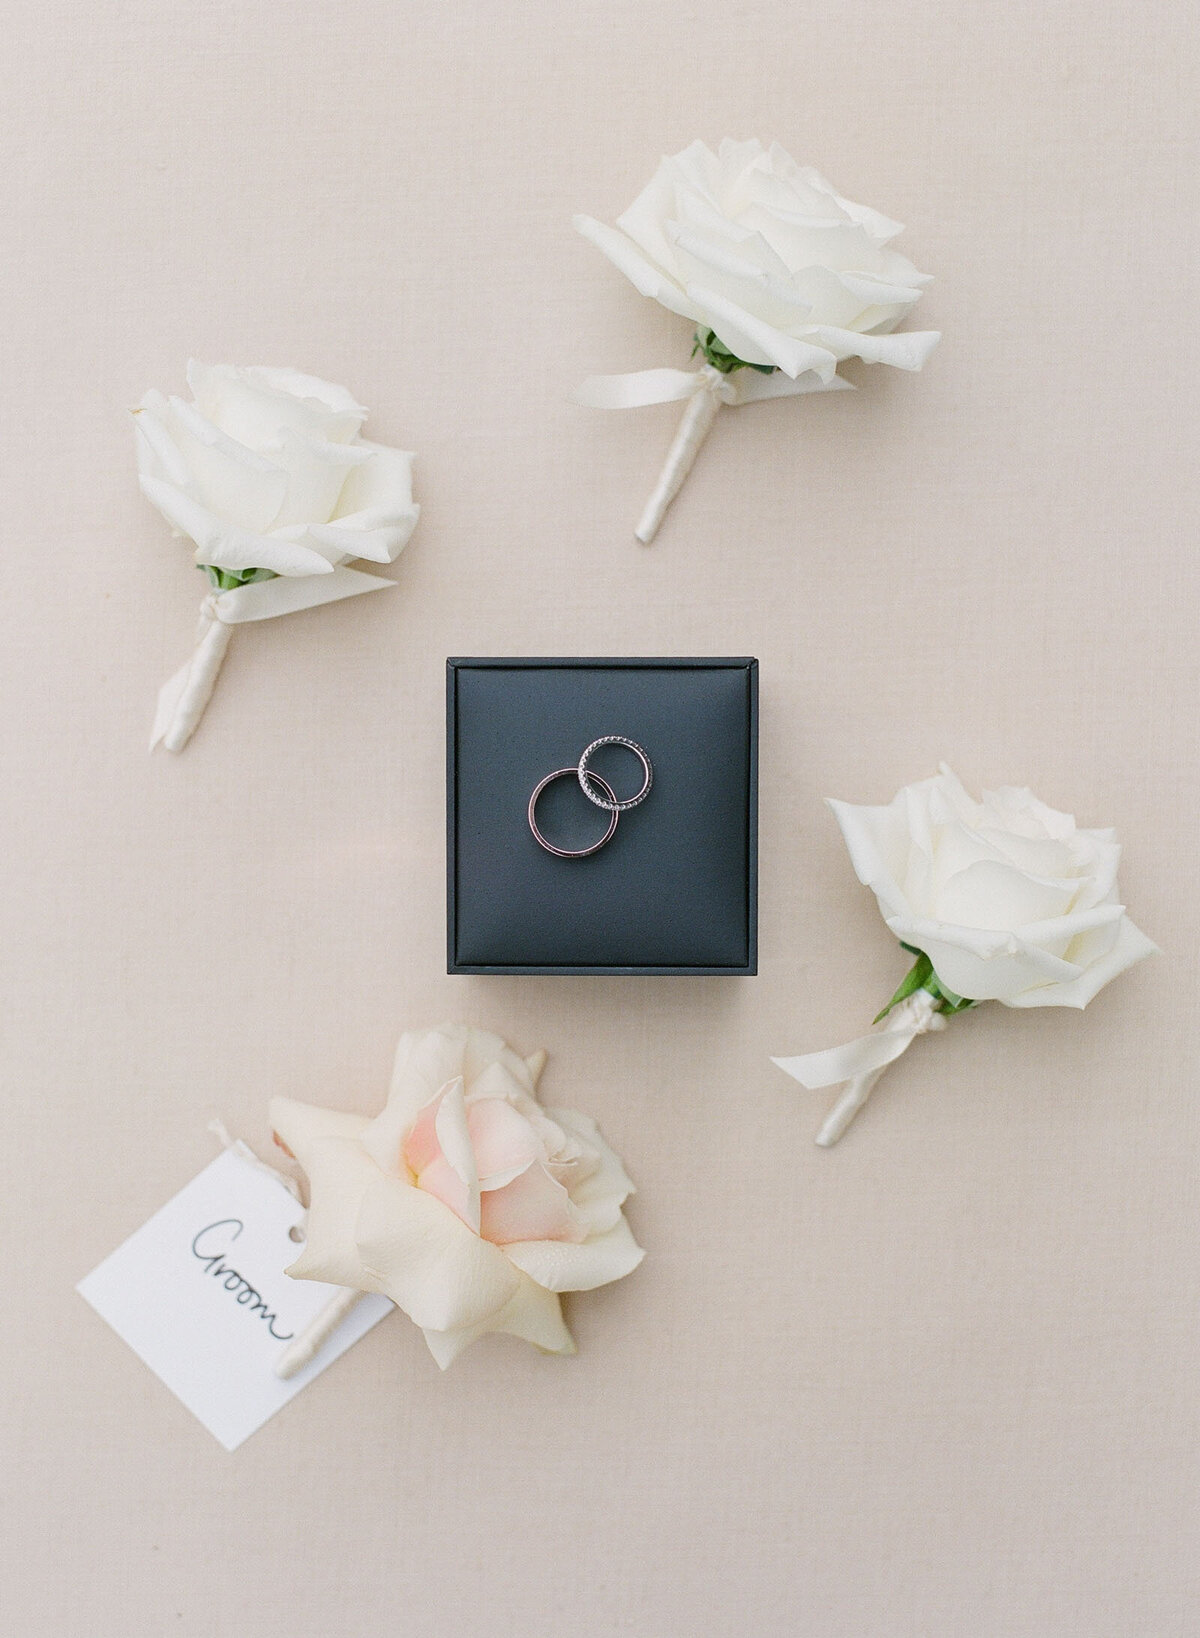 Boutonnieres and wedding rings